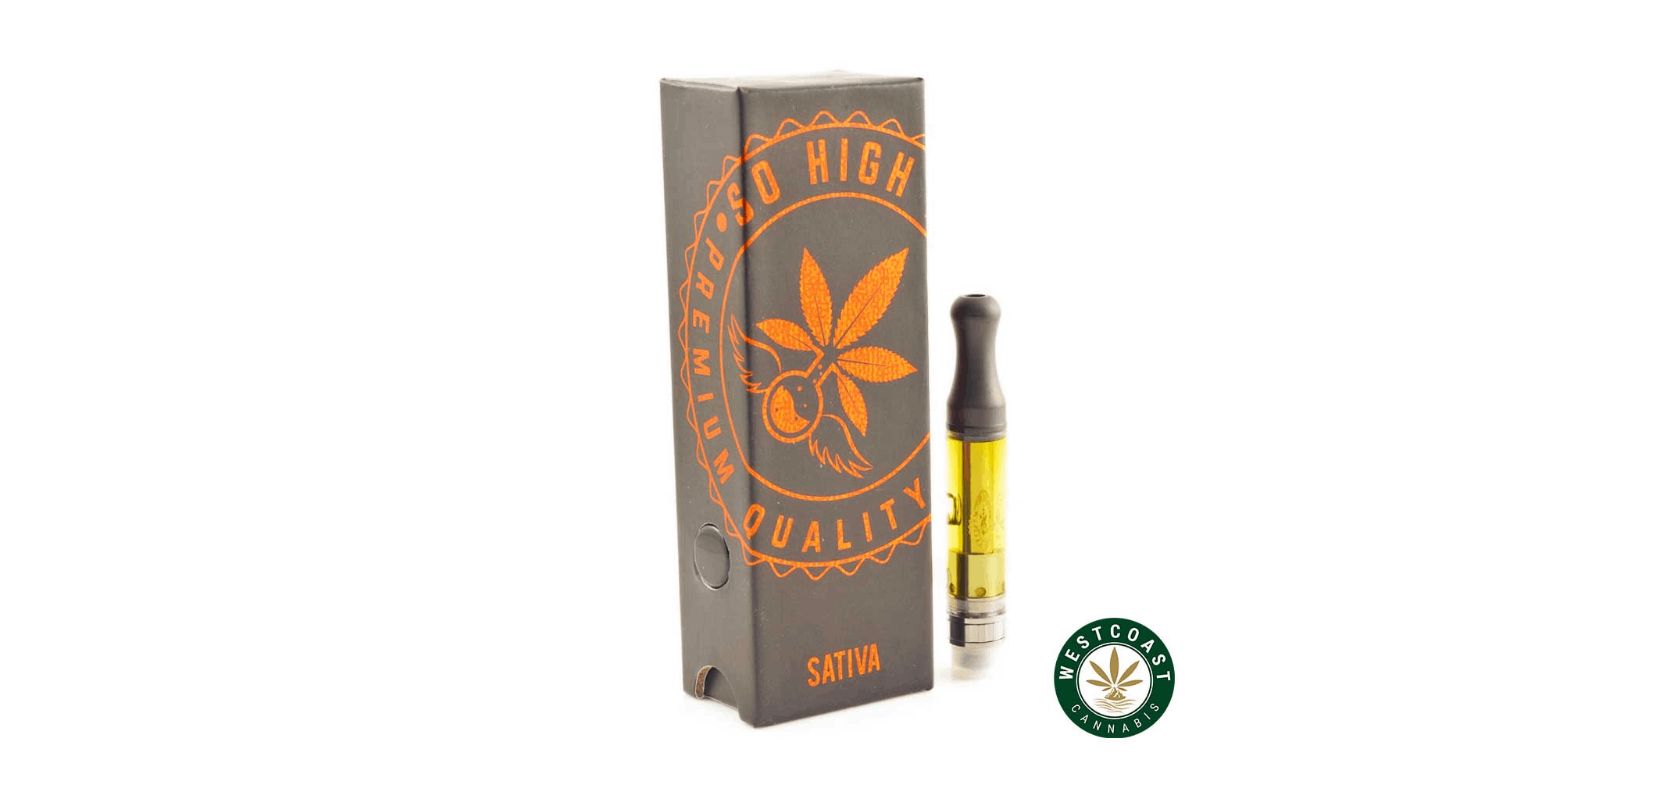 For stoners seeking an affordable and discreet way to experience the energizing effects of the Trainwreck strain, the So High Extracts Premium Vape 1ML THC – Trainwreck Cart stands out as a remarkable choice. 